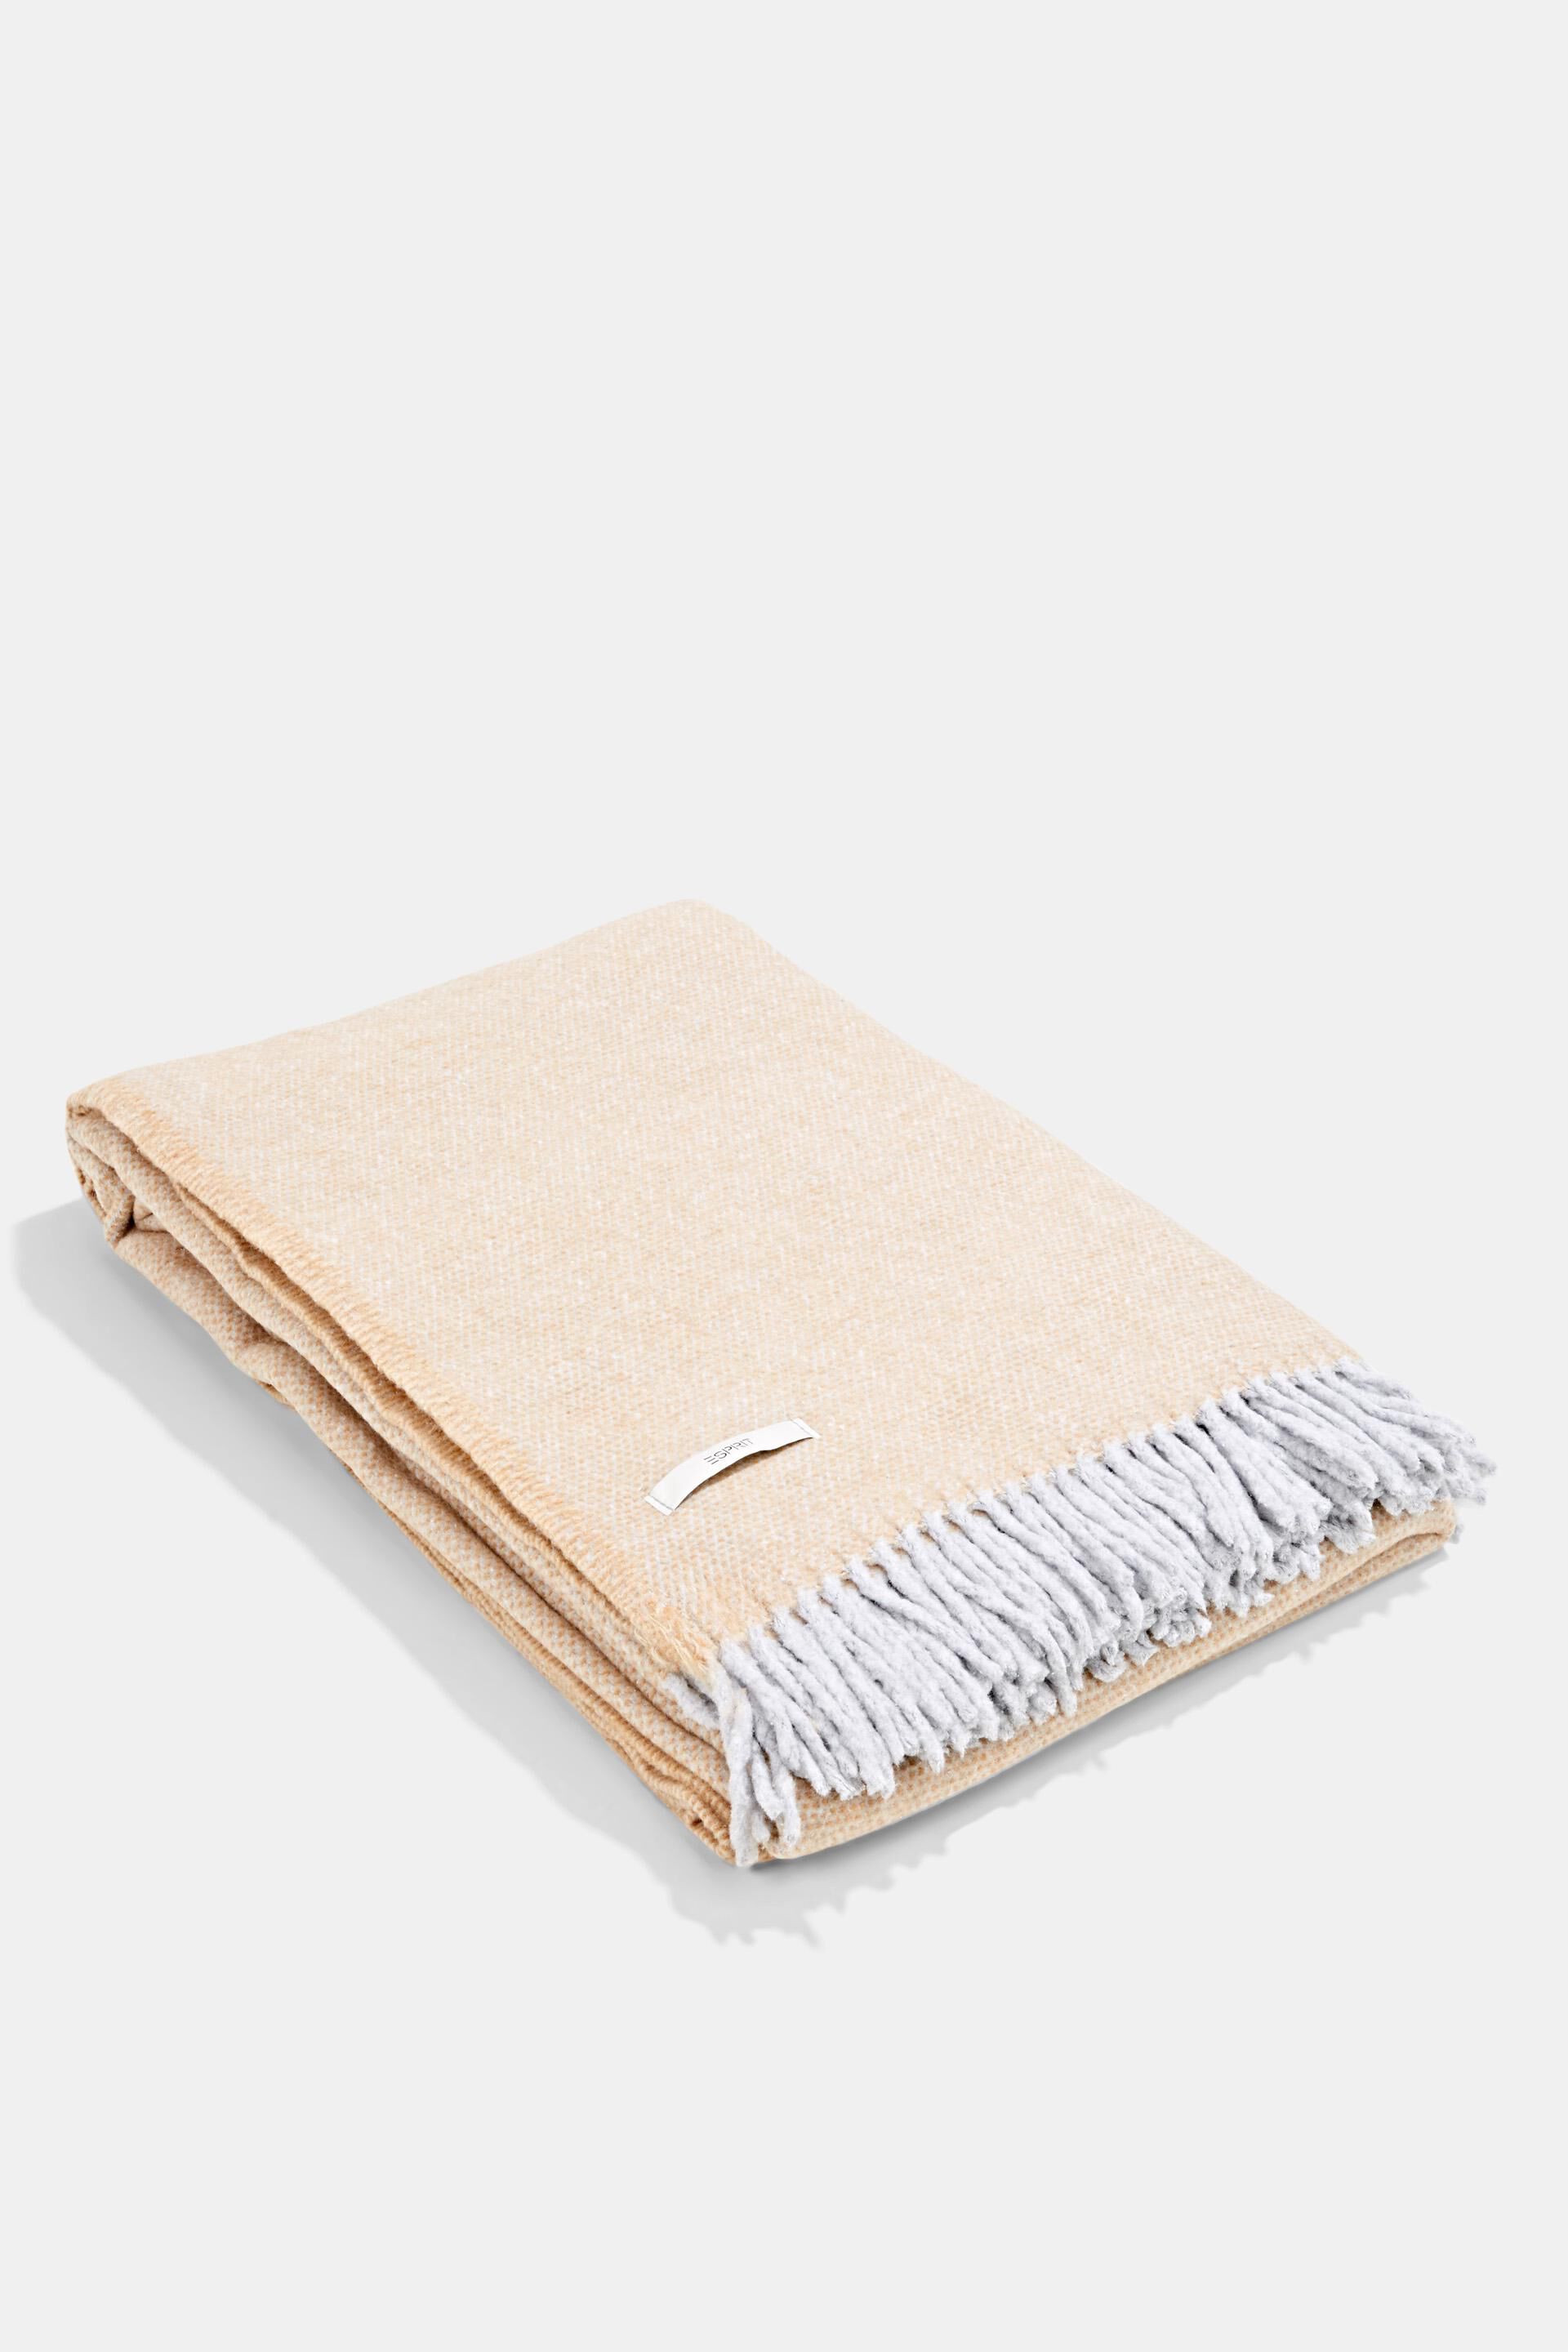 Esprit in throw cotton blended Soft